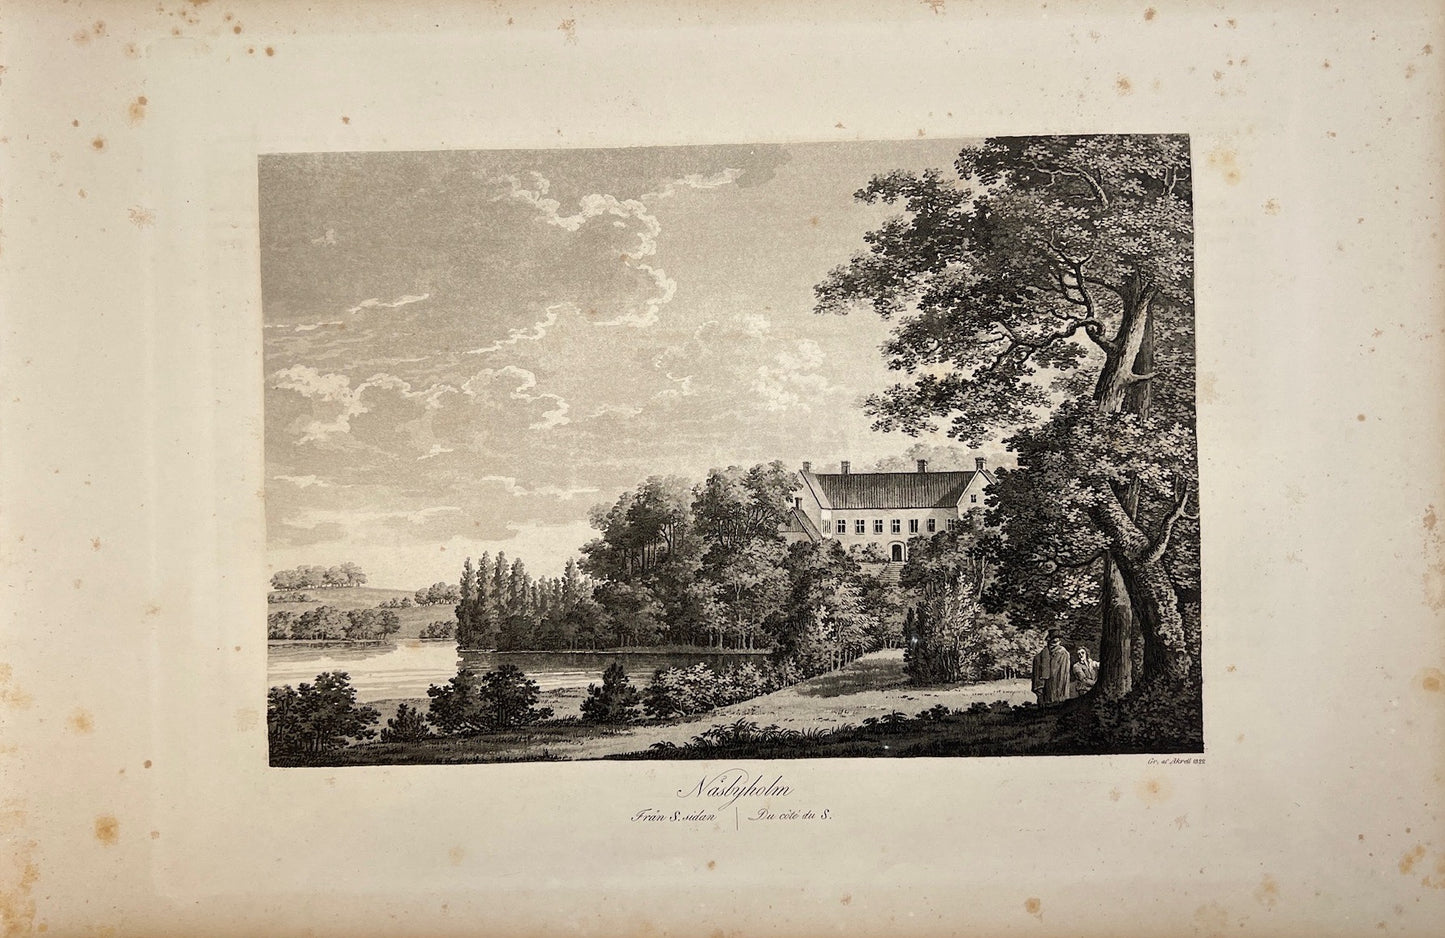 Antique Print - View of the Nasbyholm Castle - Skurup Municipality - Scania